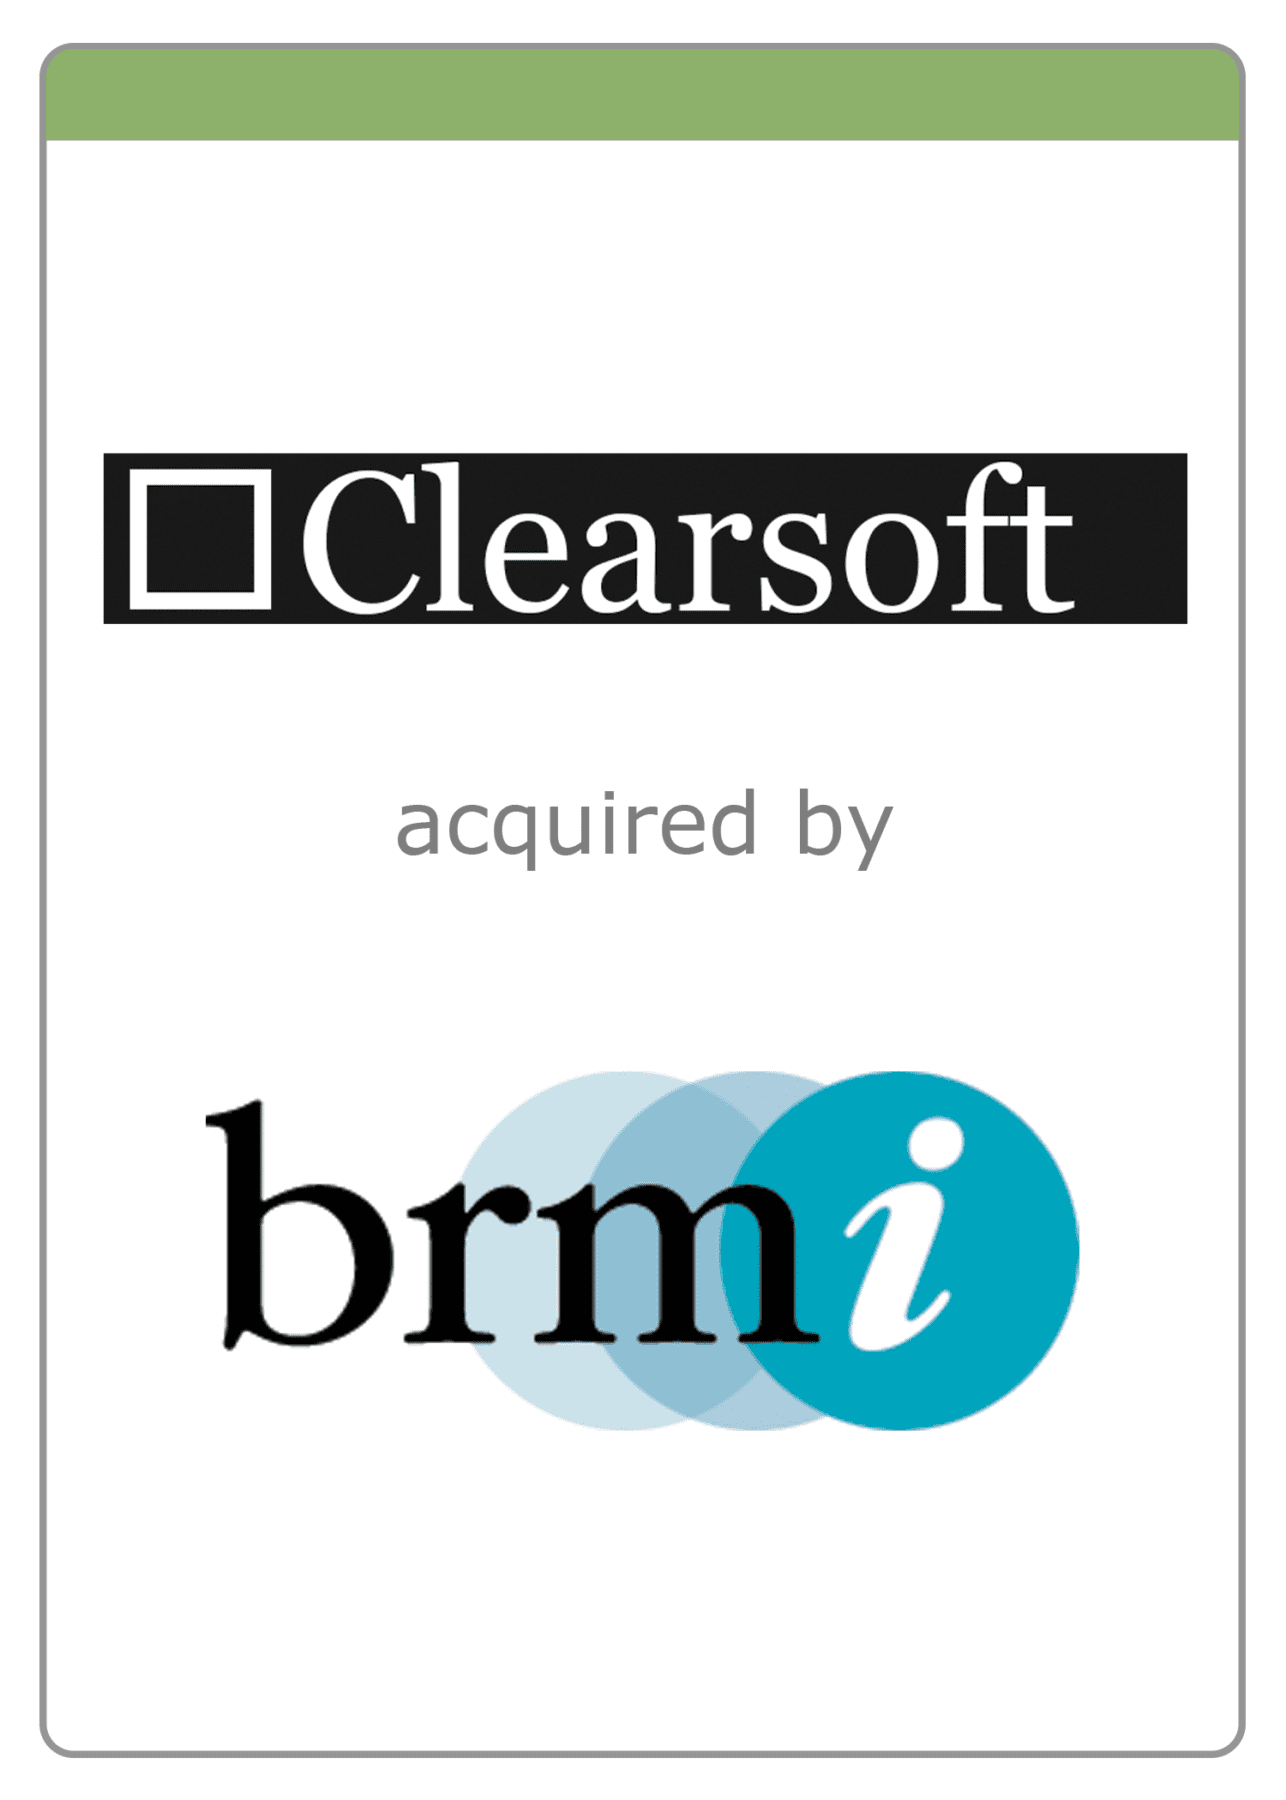 THE MCLEAN GROUP ADVISES CLEARSOFT ON ITS SALE TO BRMI